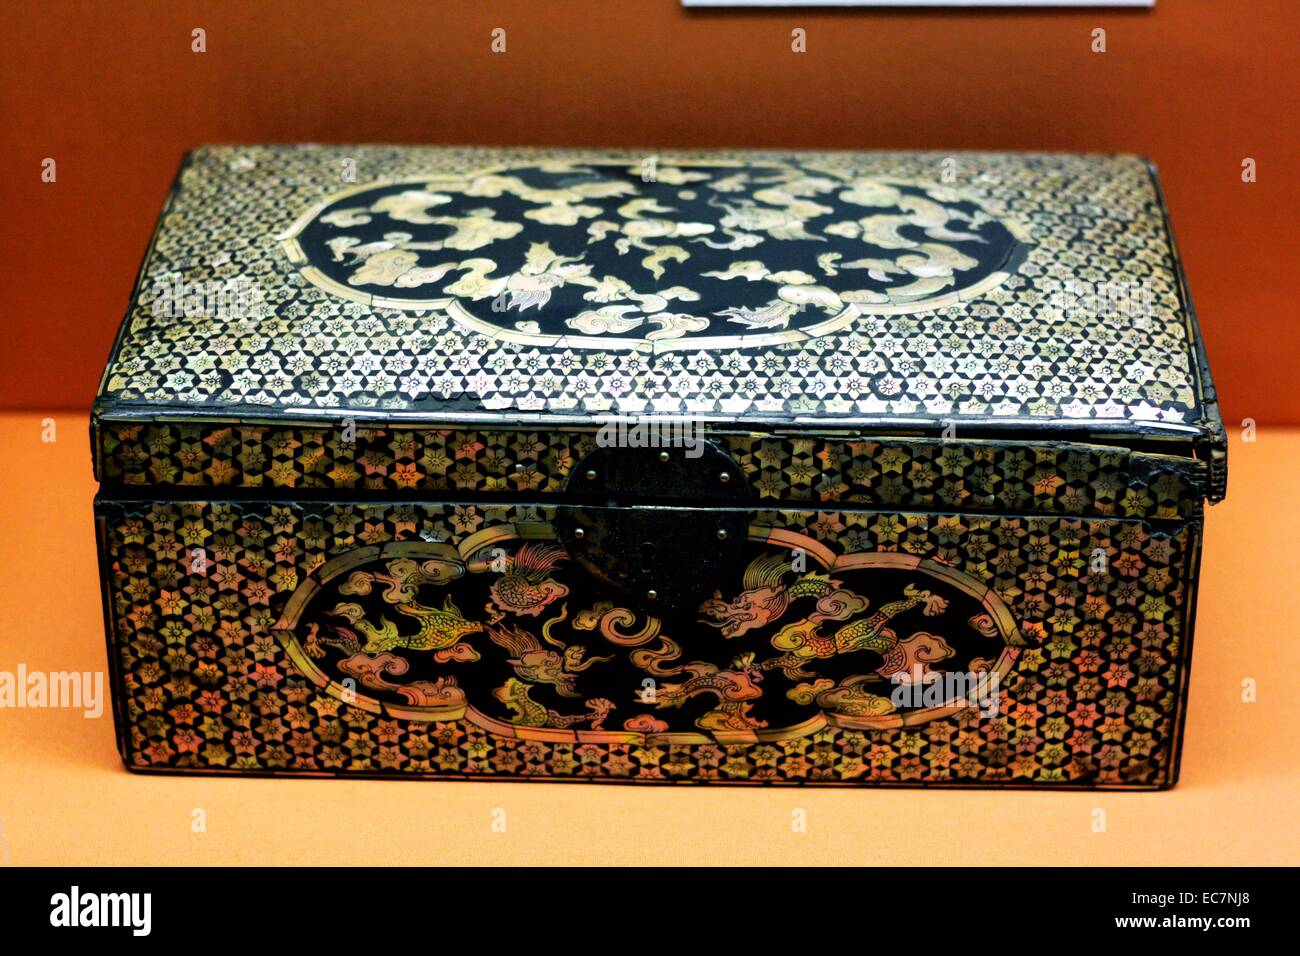 Lacquer box from Korea 1500-1600 Yi dynasty (1392-1910).  These dragons are weaving in and out of the clouds. In Korea dragons were a symbol of the Emperor, as in China. Stock Photo